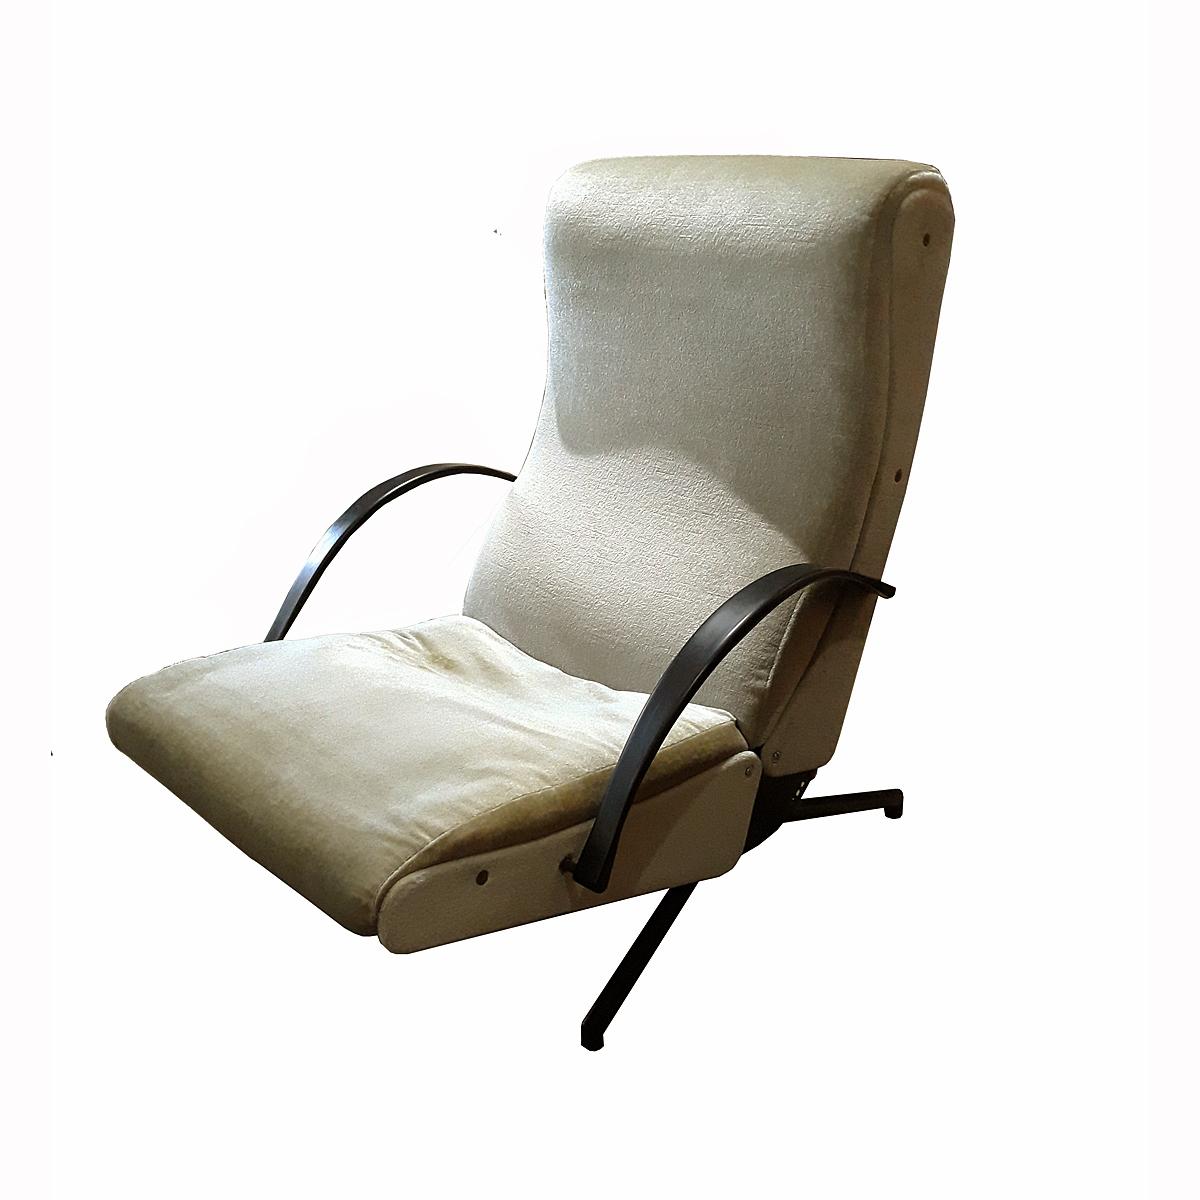 P40 reclining chair by Osvaldo Borsani for Tecno, Italy, 1955. 
Mid-Century Modern design. Reupholstered in light green Mohair. Original brass mechanism and tubular feet. Original Tecno label embedded. 
Does not include a footrest. 

Fully